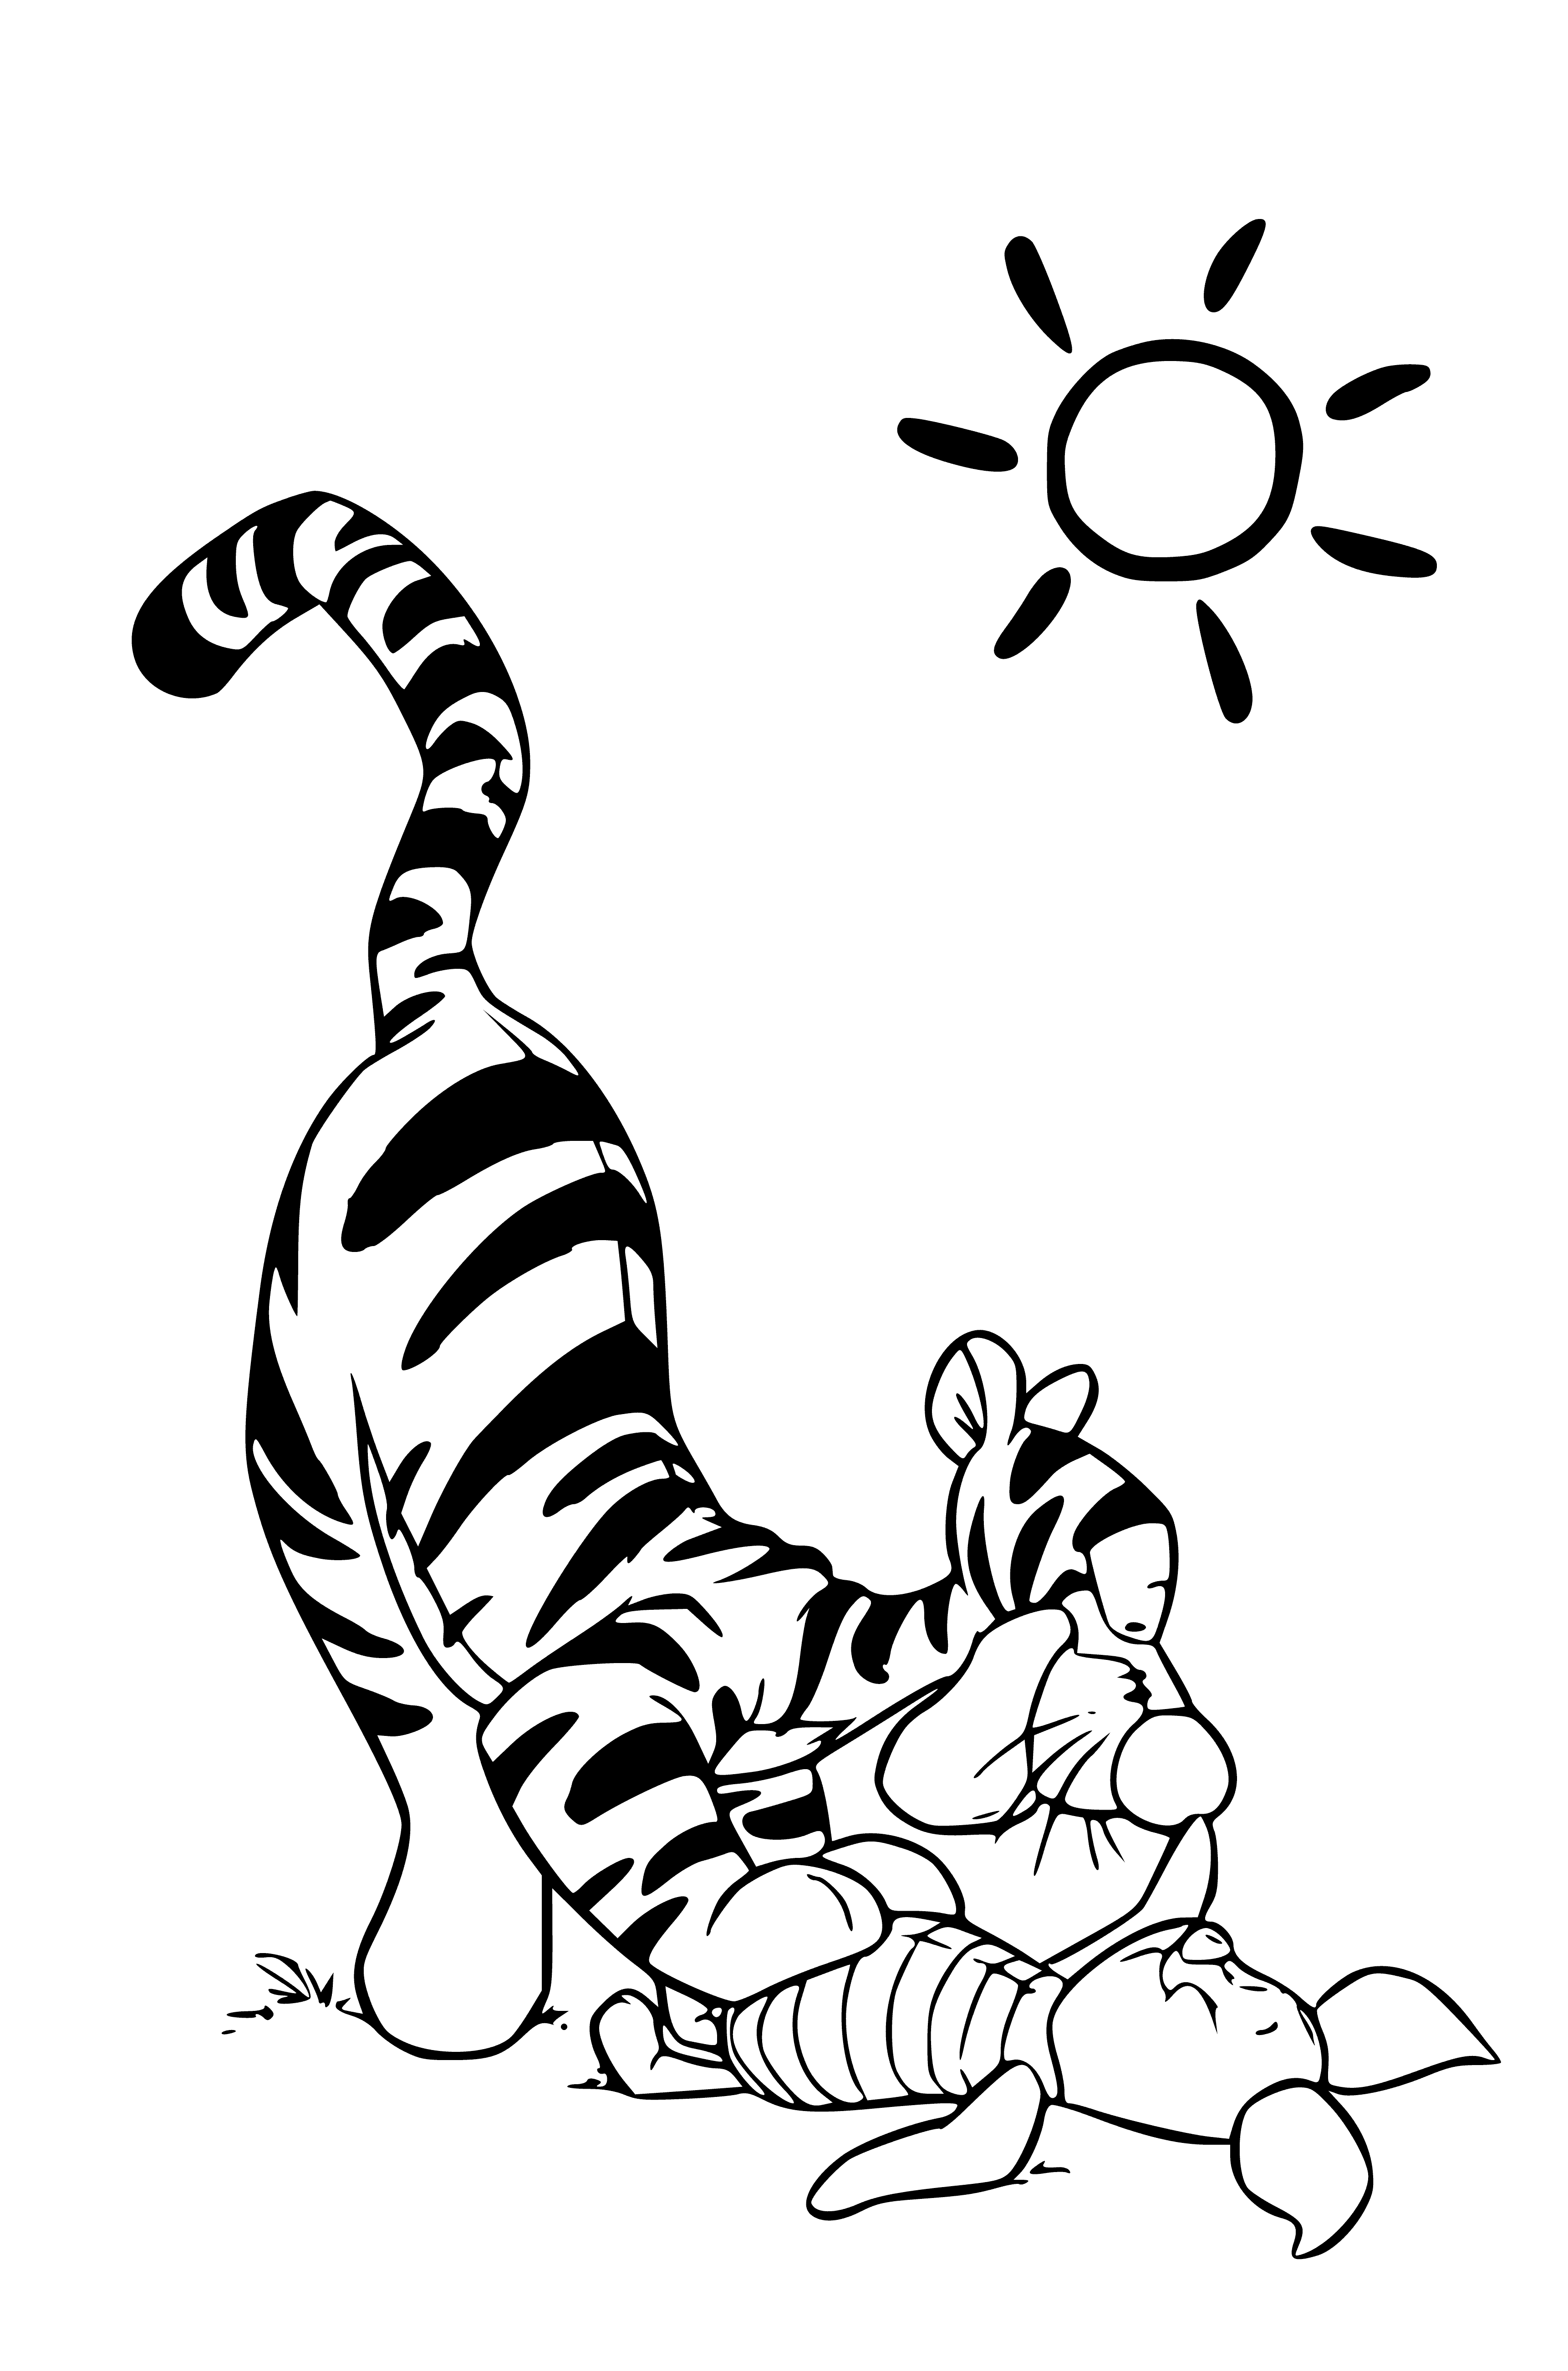 coloring page: Tigger happily confronts Piggy, who looks timidly back. Piggy isn't keen on the close attention.